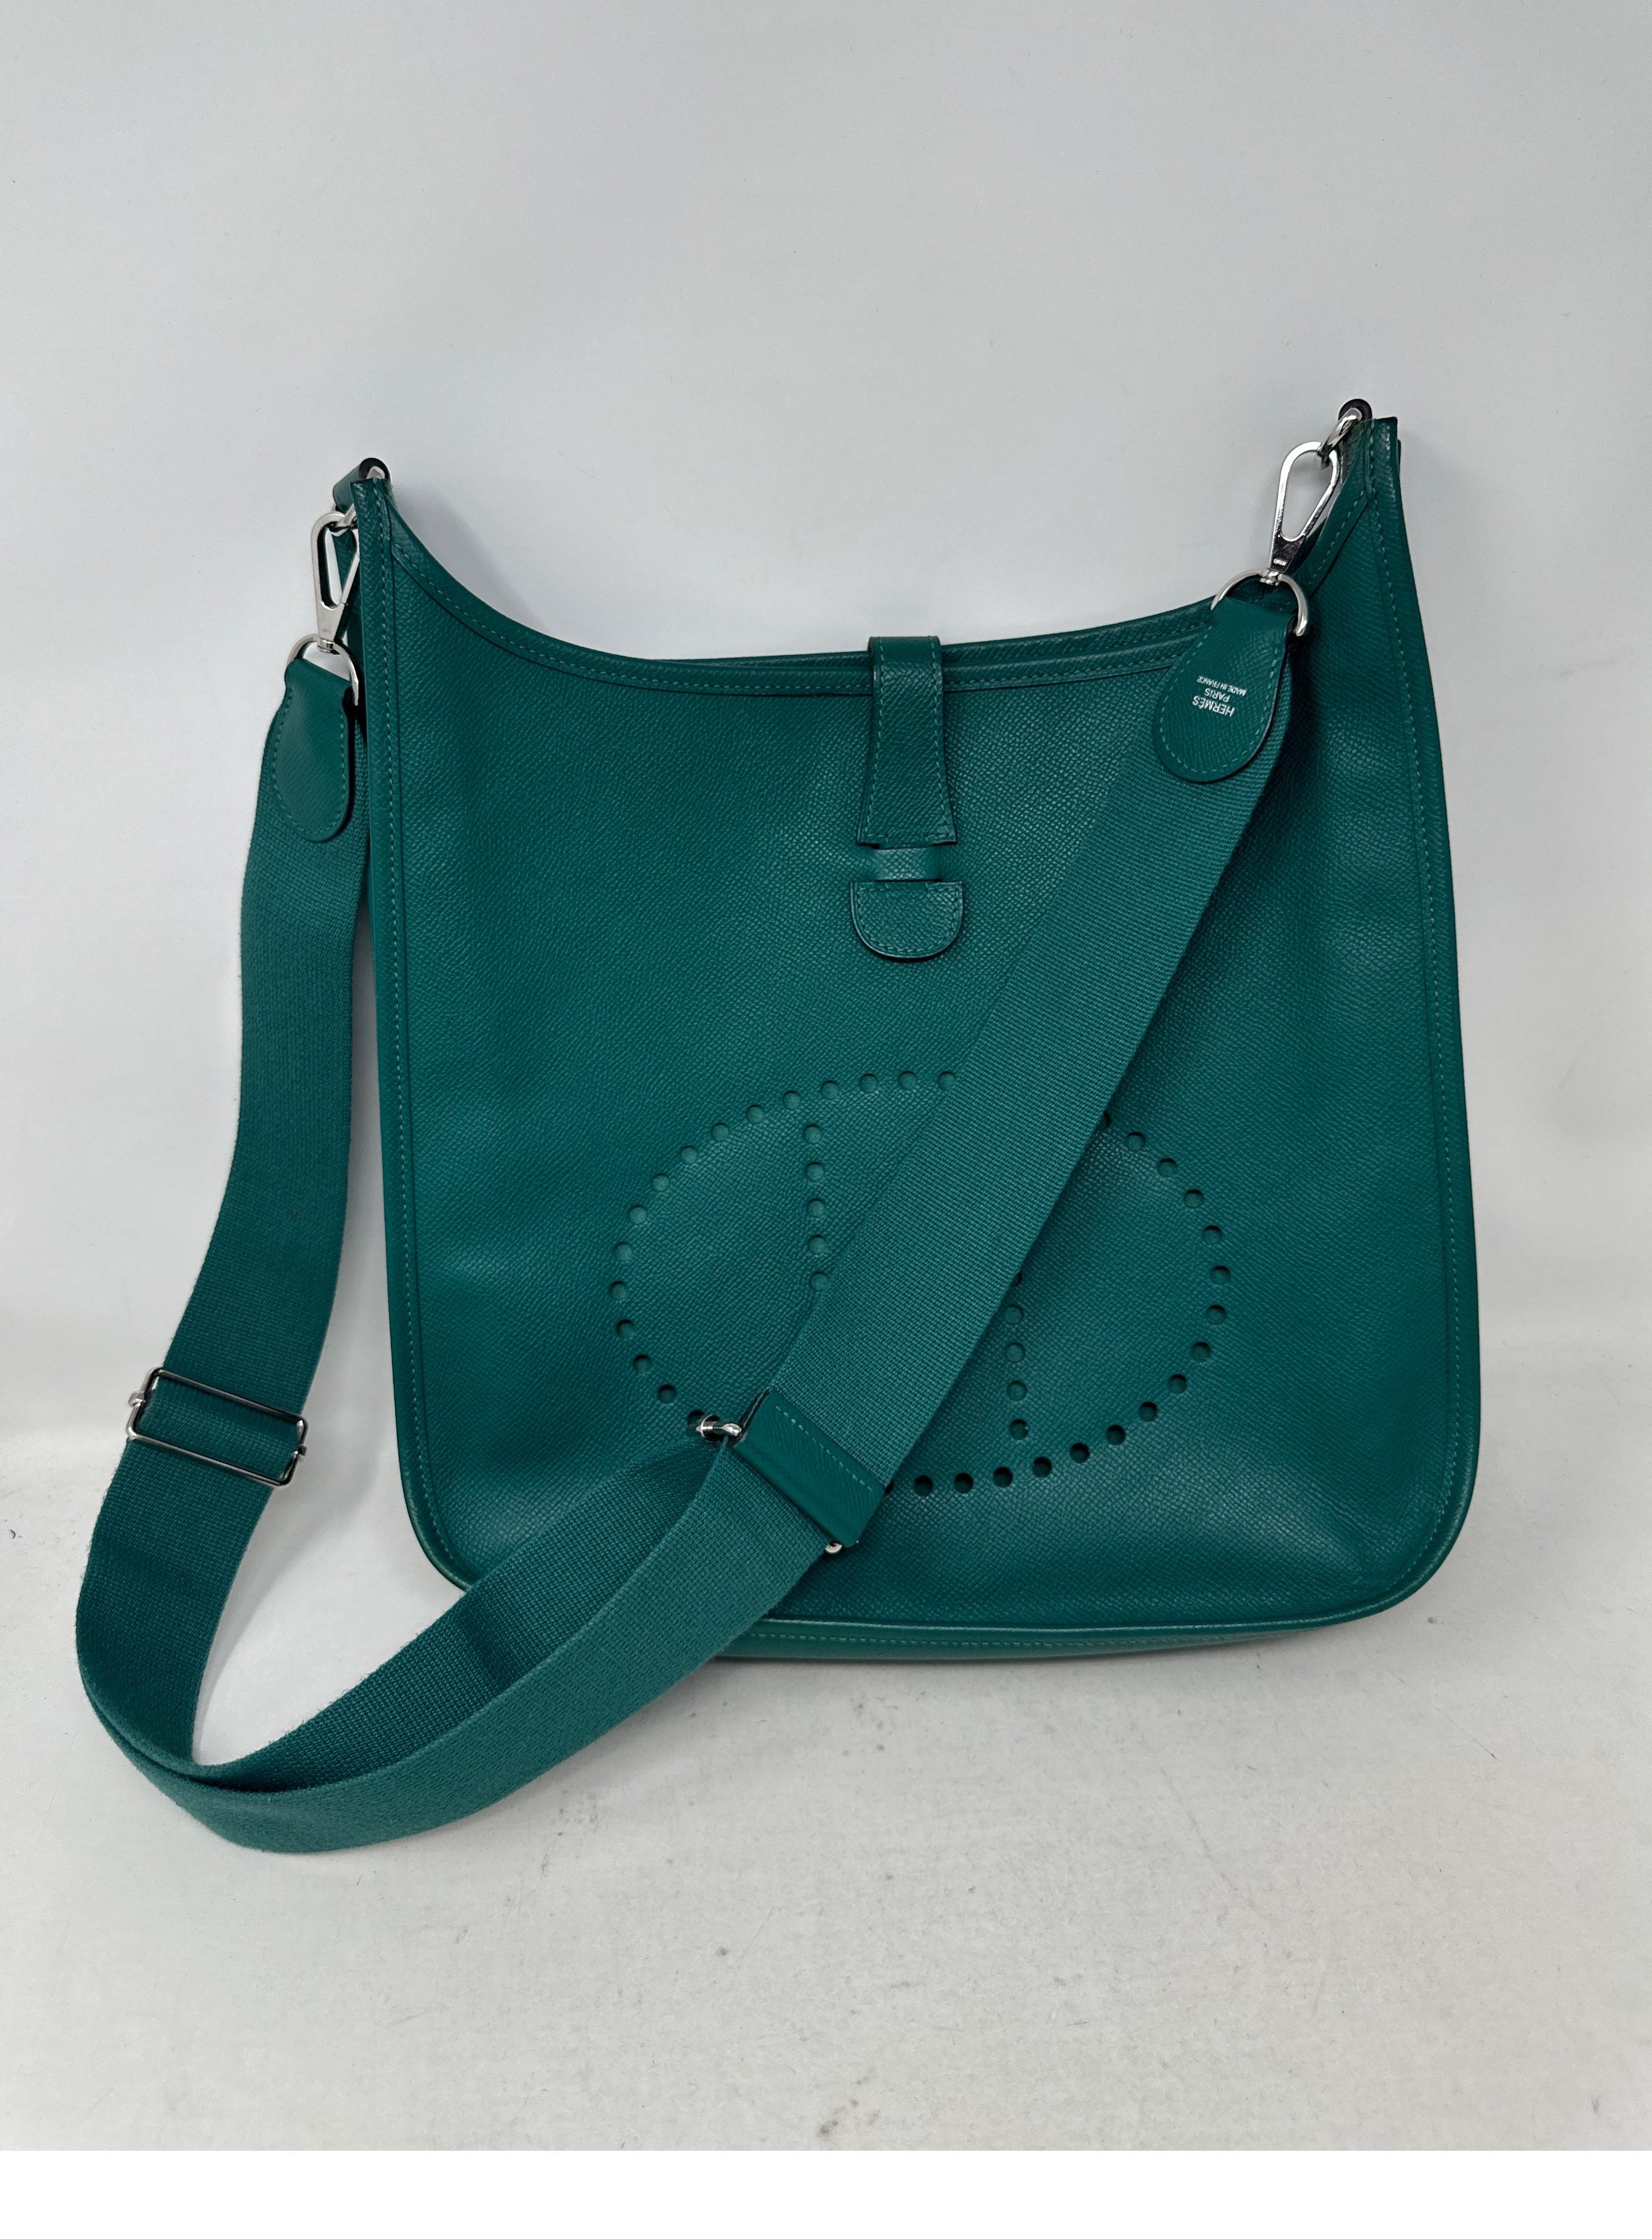 Hermes Malachite Evelyne GM Bag. Excellent condition. Looks like new. Rare green malachite color. Epsom leather. Light durable leather and scratch resistant. Interior clean suede. Great crossbody bag for travel and everyday use. The larger GM size.